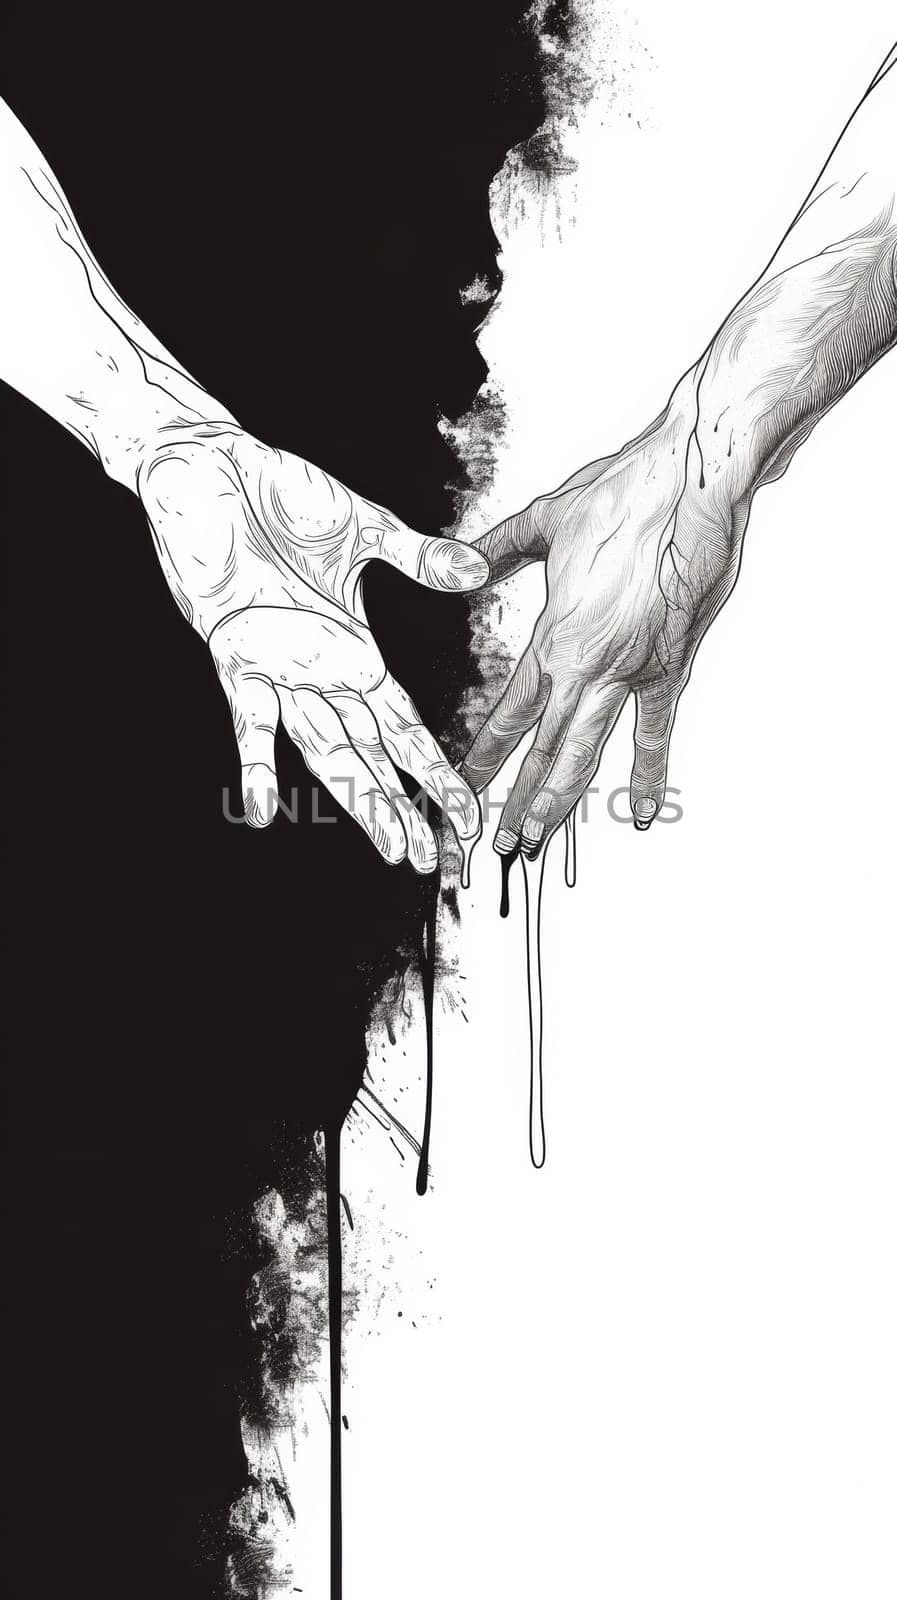 A drawing of two hands reaching for each other with black paint splattered on them, AI by starush